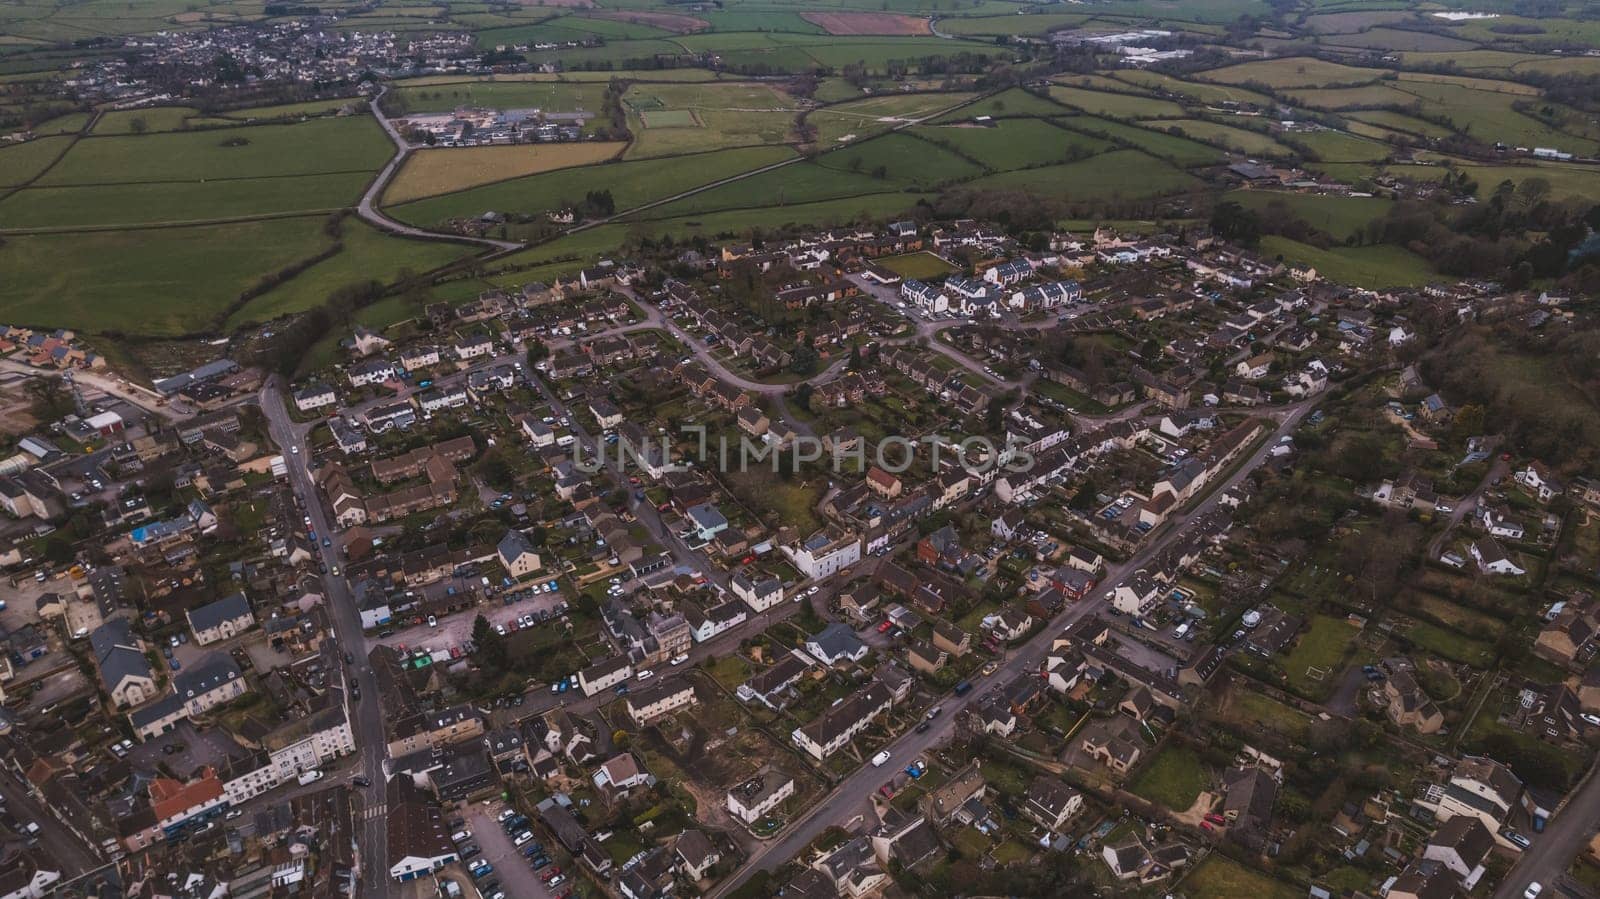 Aerial view of neighborhood surrounded by green landscape by fabioxavierphotography